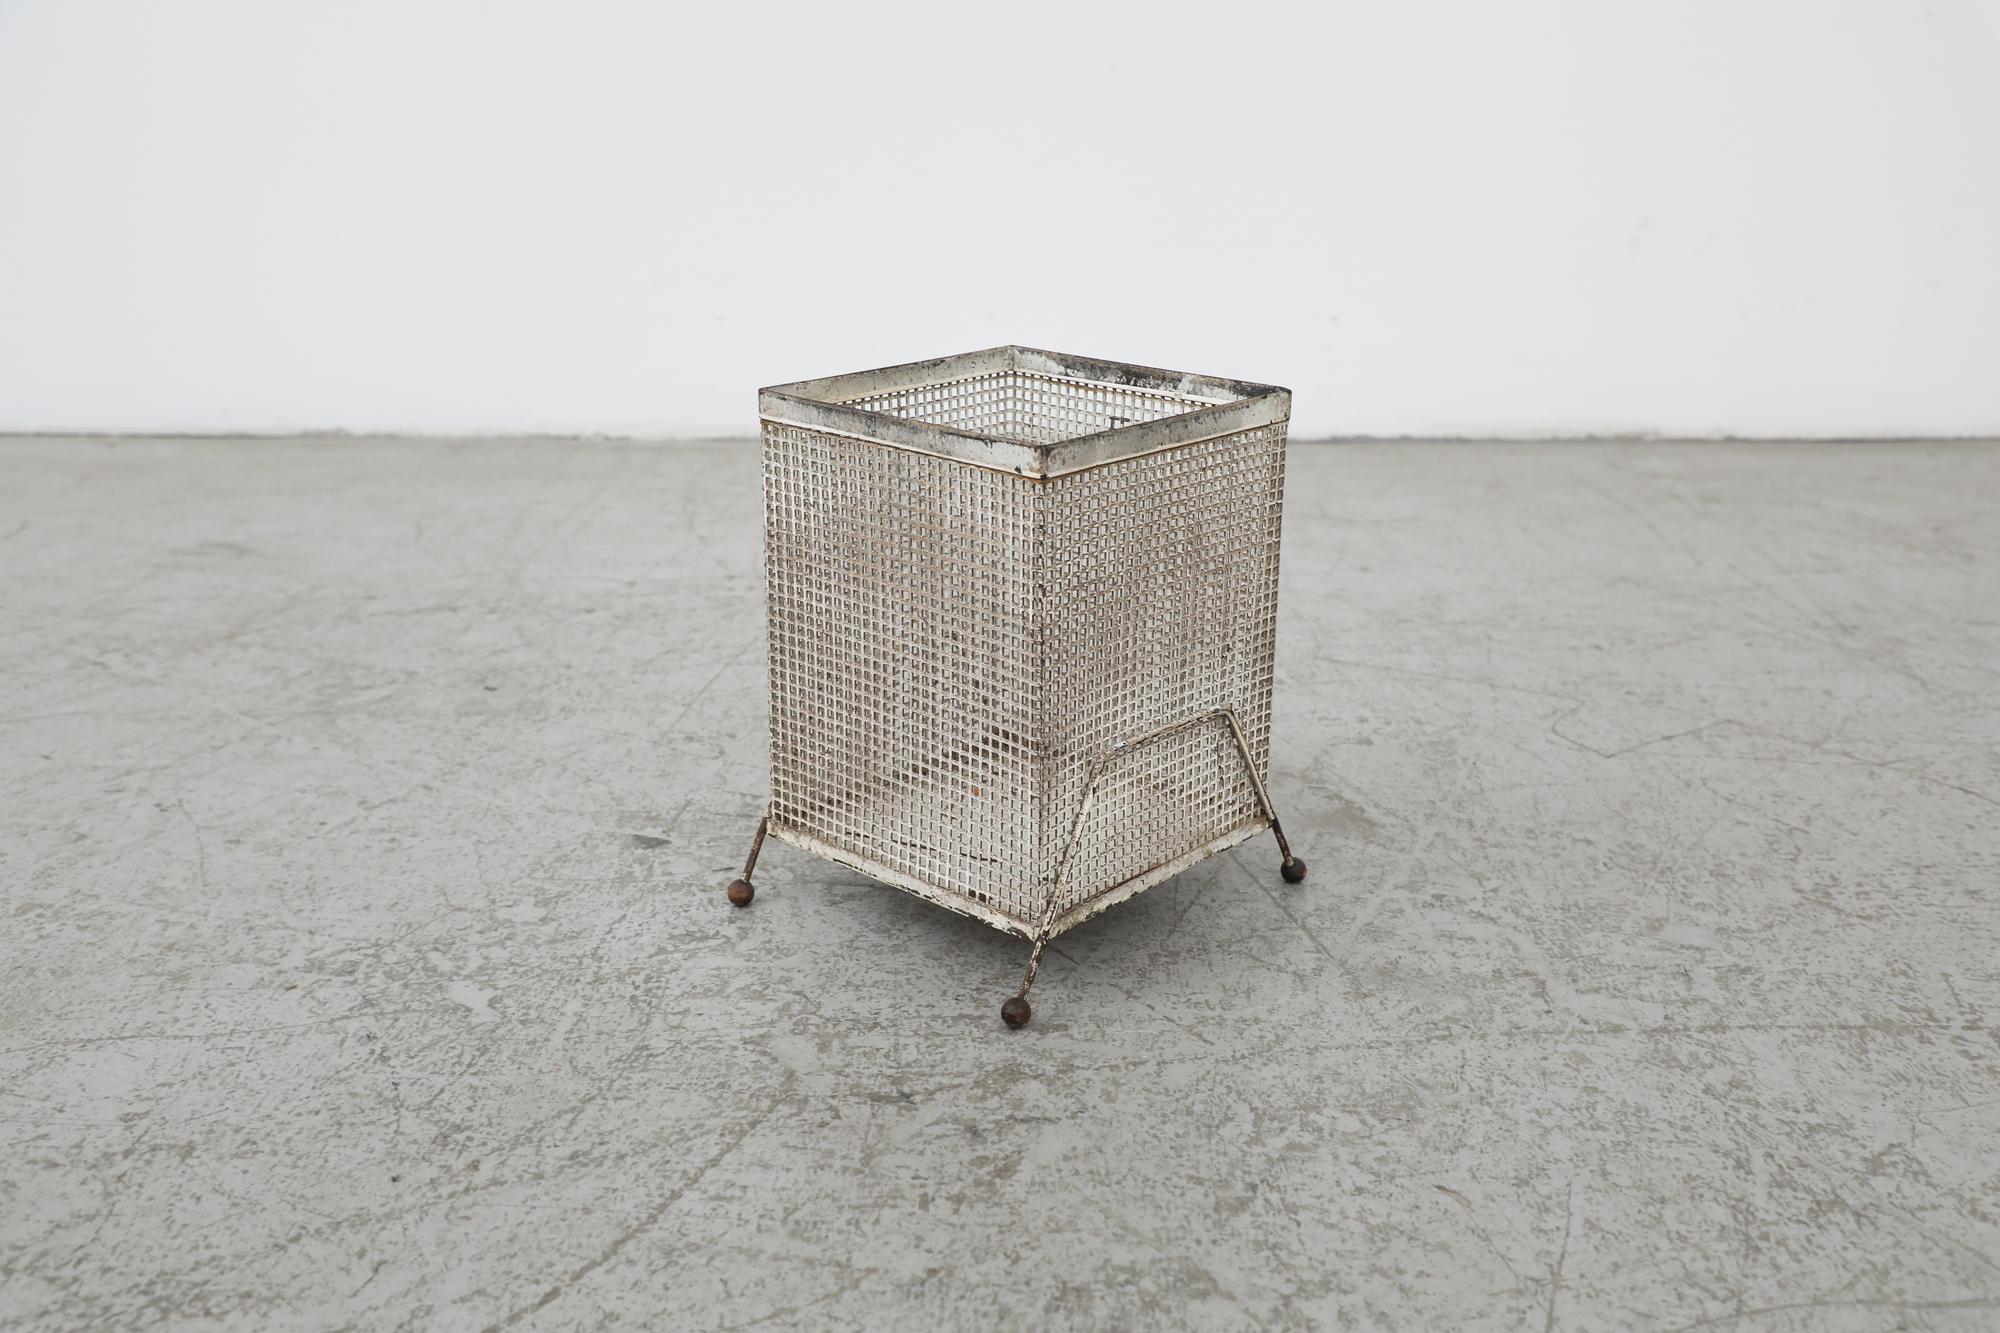 Mategot (attr) perforated metal waste basket or umbrella stand with perforated metal sides, sheet metal base with little round wood tipped wire legs. In very original condition with heavy patina and visible wear consistent with its age and use.